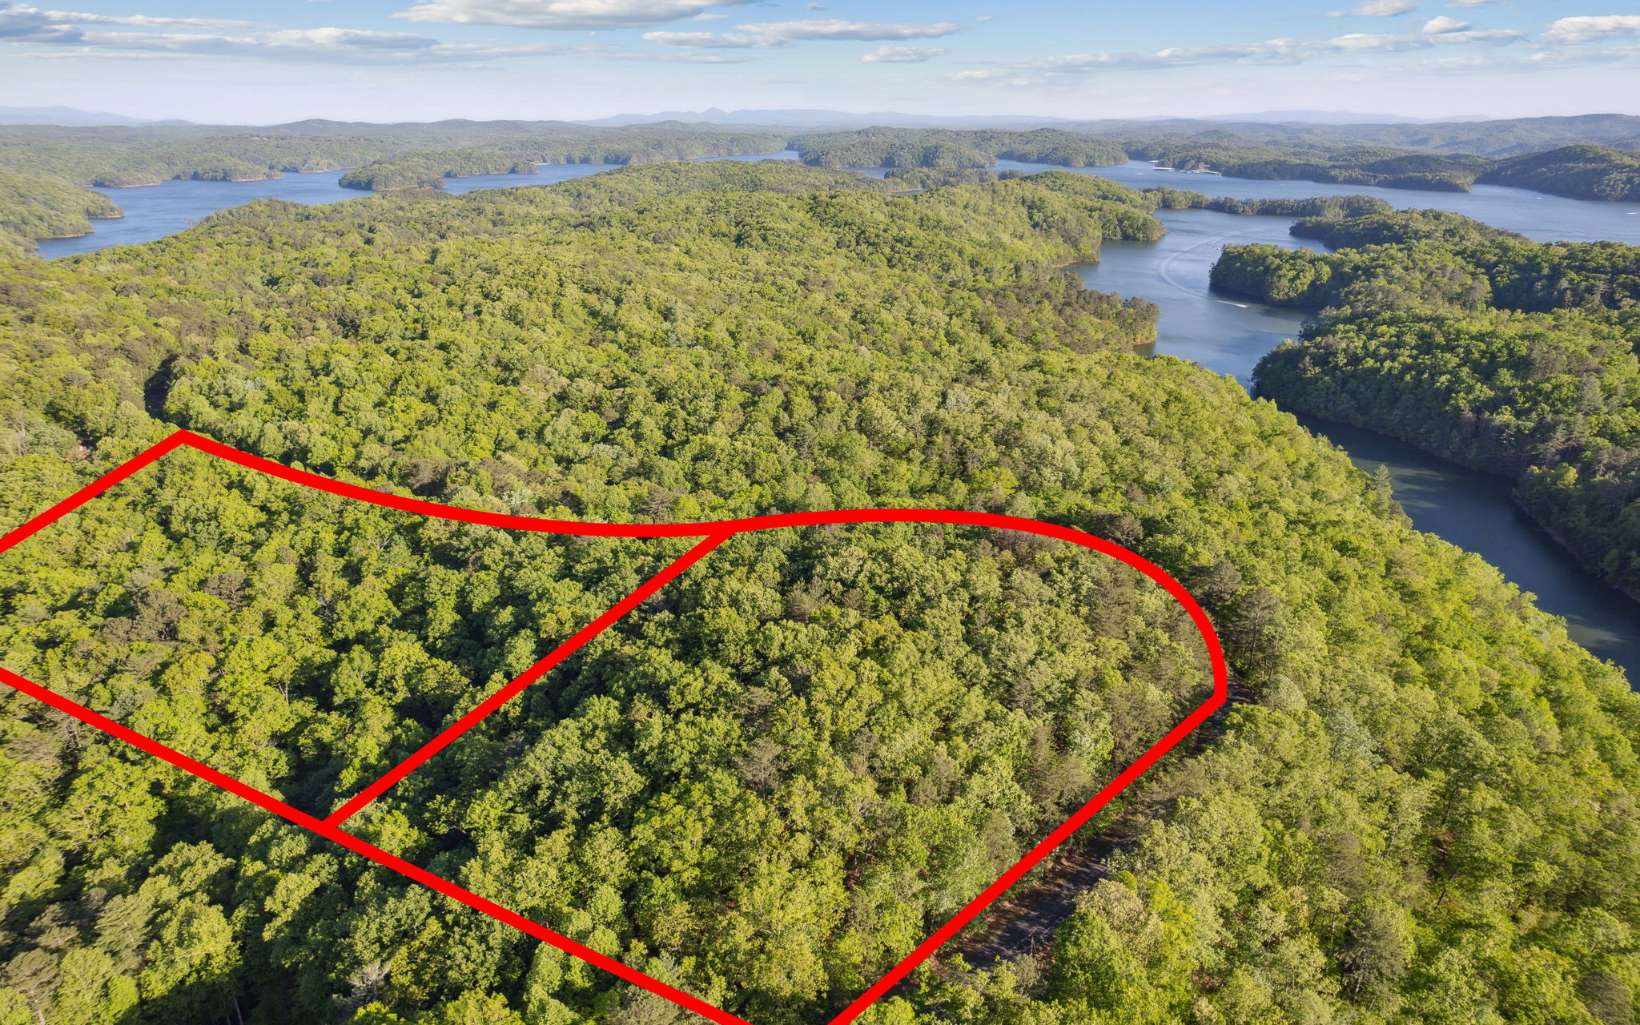 This is an amazing opportunity to own two adjoining wooded lots in North Georgia. These lots offer multiple buildable sites and great access to outdoor recreation. (potential lake/mtn views) They are just a short drive away from the Woodring Branch boat ramp for Carter's Lake, making them perfect for anyone looking to enjoy a day of fishing, kayaking, or canoeing. The lots are also great for biking and trail hiking, featuring beautiful wooded landscapes and rolling topography. Woodring Branch Campground offers primitive and developed camping right at your back door. (less 1 mile) There's several covered picnic tables scattered out on a private like peninsula into Carters Lake for your enjoyment. Choose to explore and hike around the lake down one of 2 trails, Oak Ridge Nature Trail and Amadahy Trail. Don't miss out on this incredible opportunity to build your dream mountain getaway!